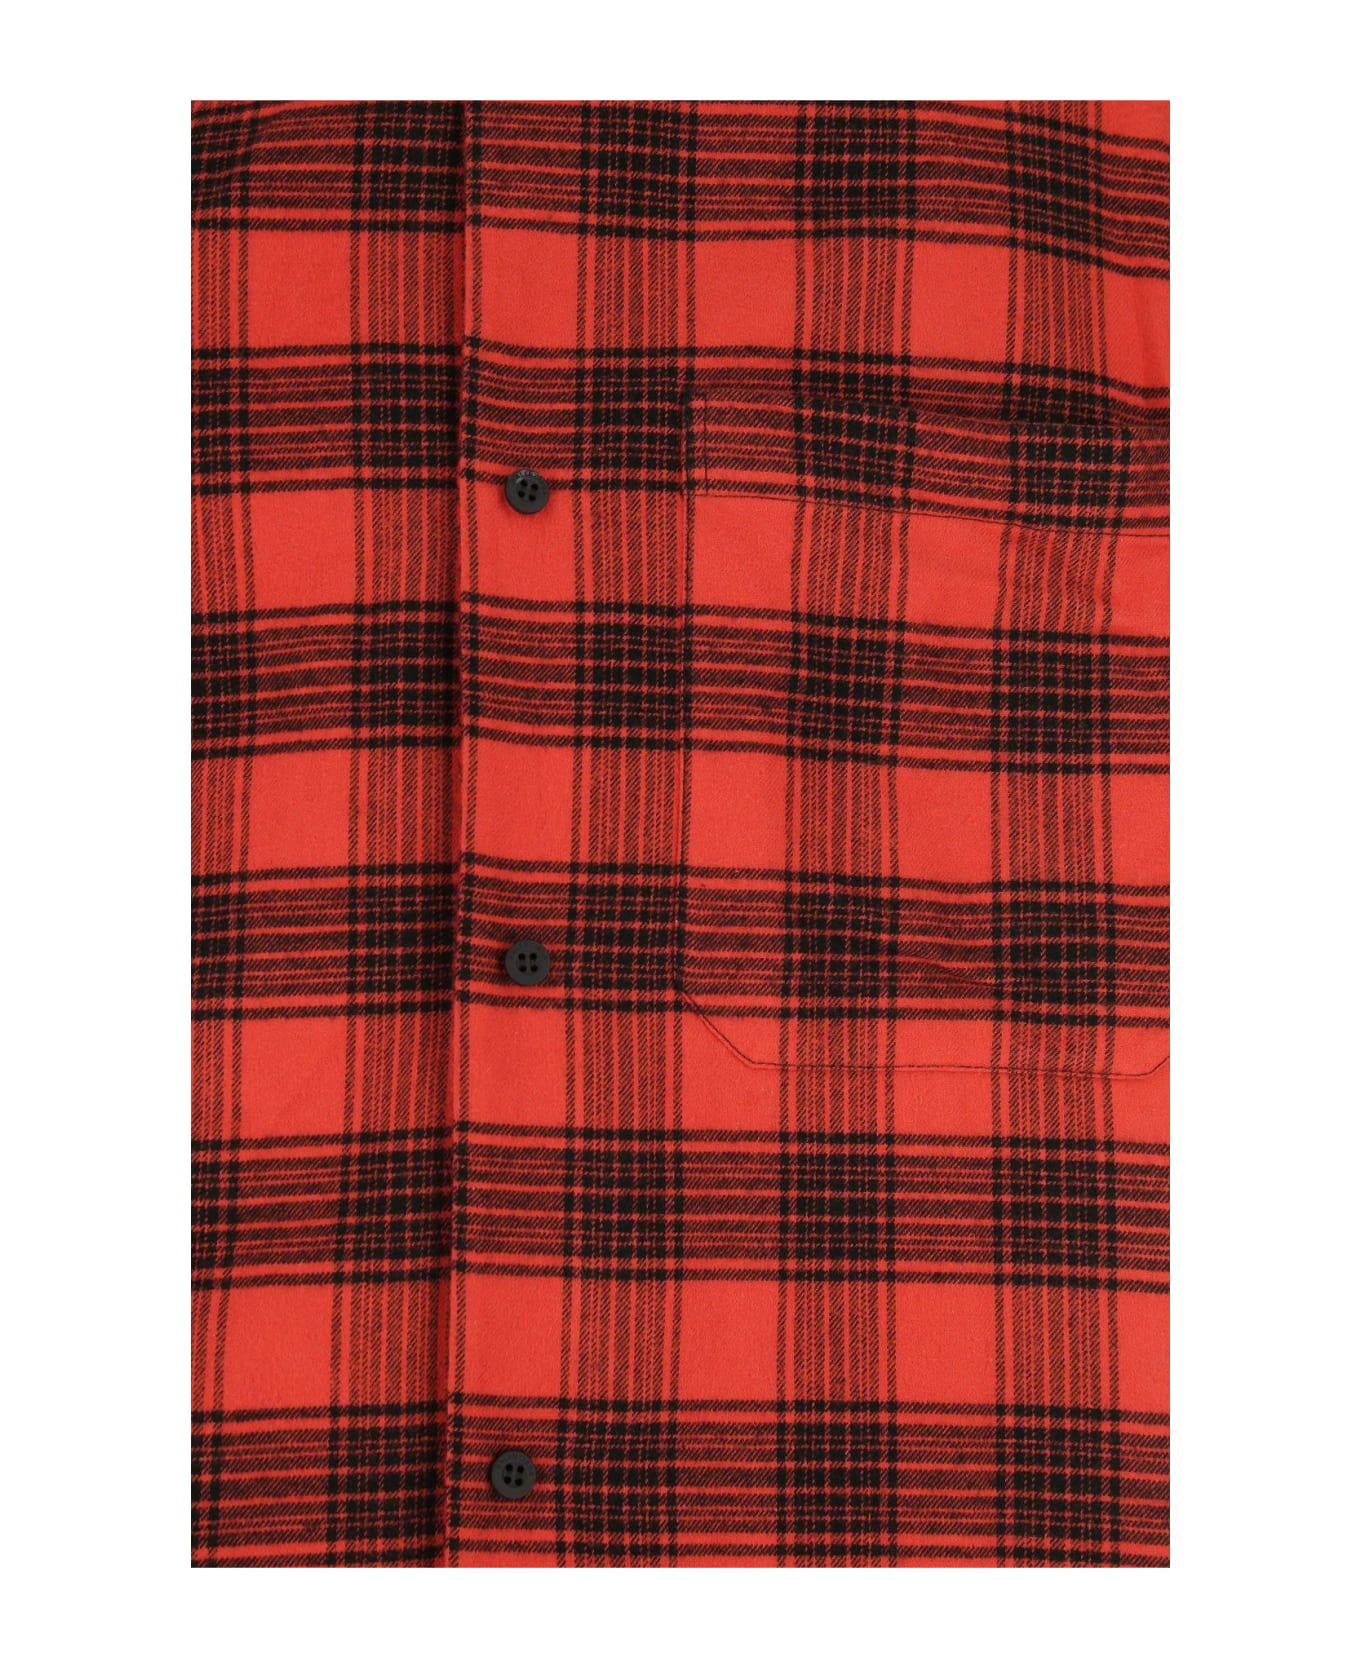 Balenciaga Embroidered Flanel Reversible Oversize Shirt - RED